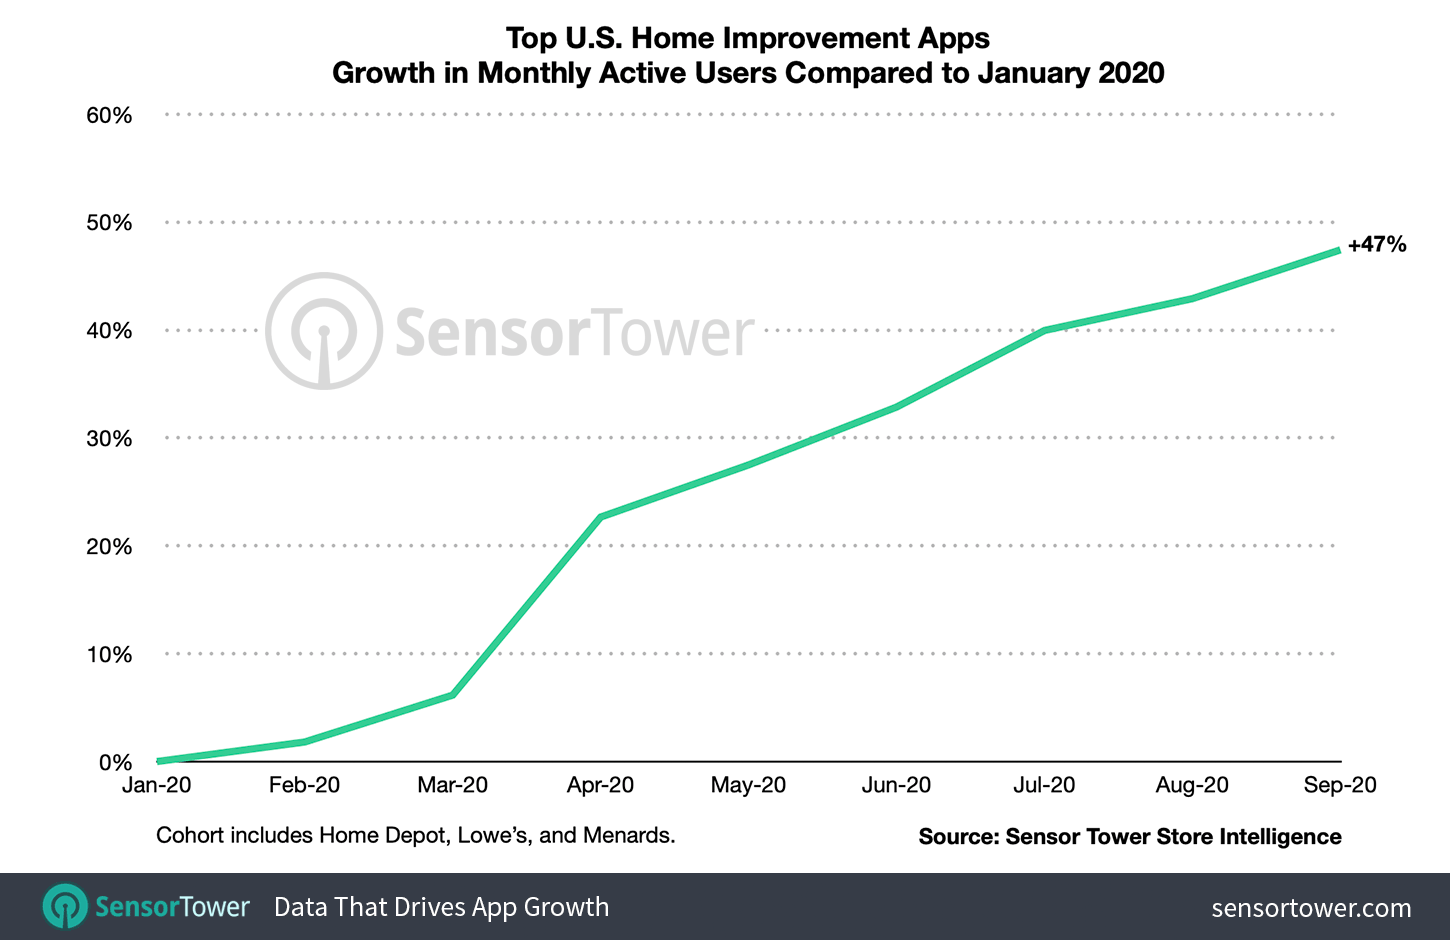 Monthly Growth of Top Home Improvement App MAUs in the U.S. During 2020 Compared to January 2020